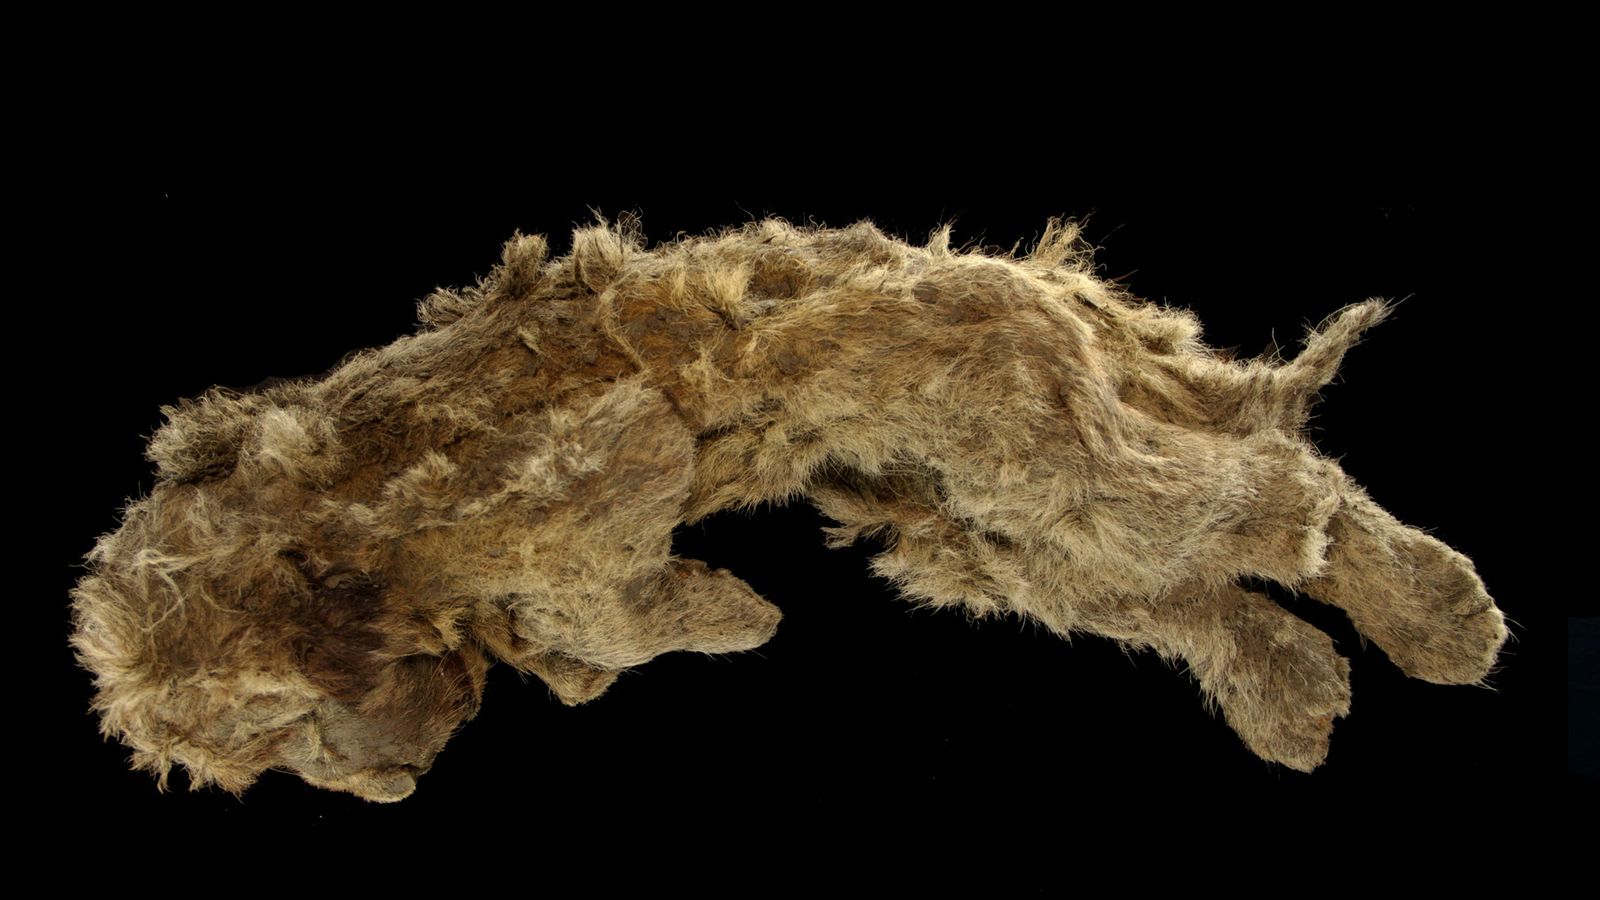 Siberia: Well-preserved lion cub found in permafrost lived 28,000 years ago